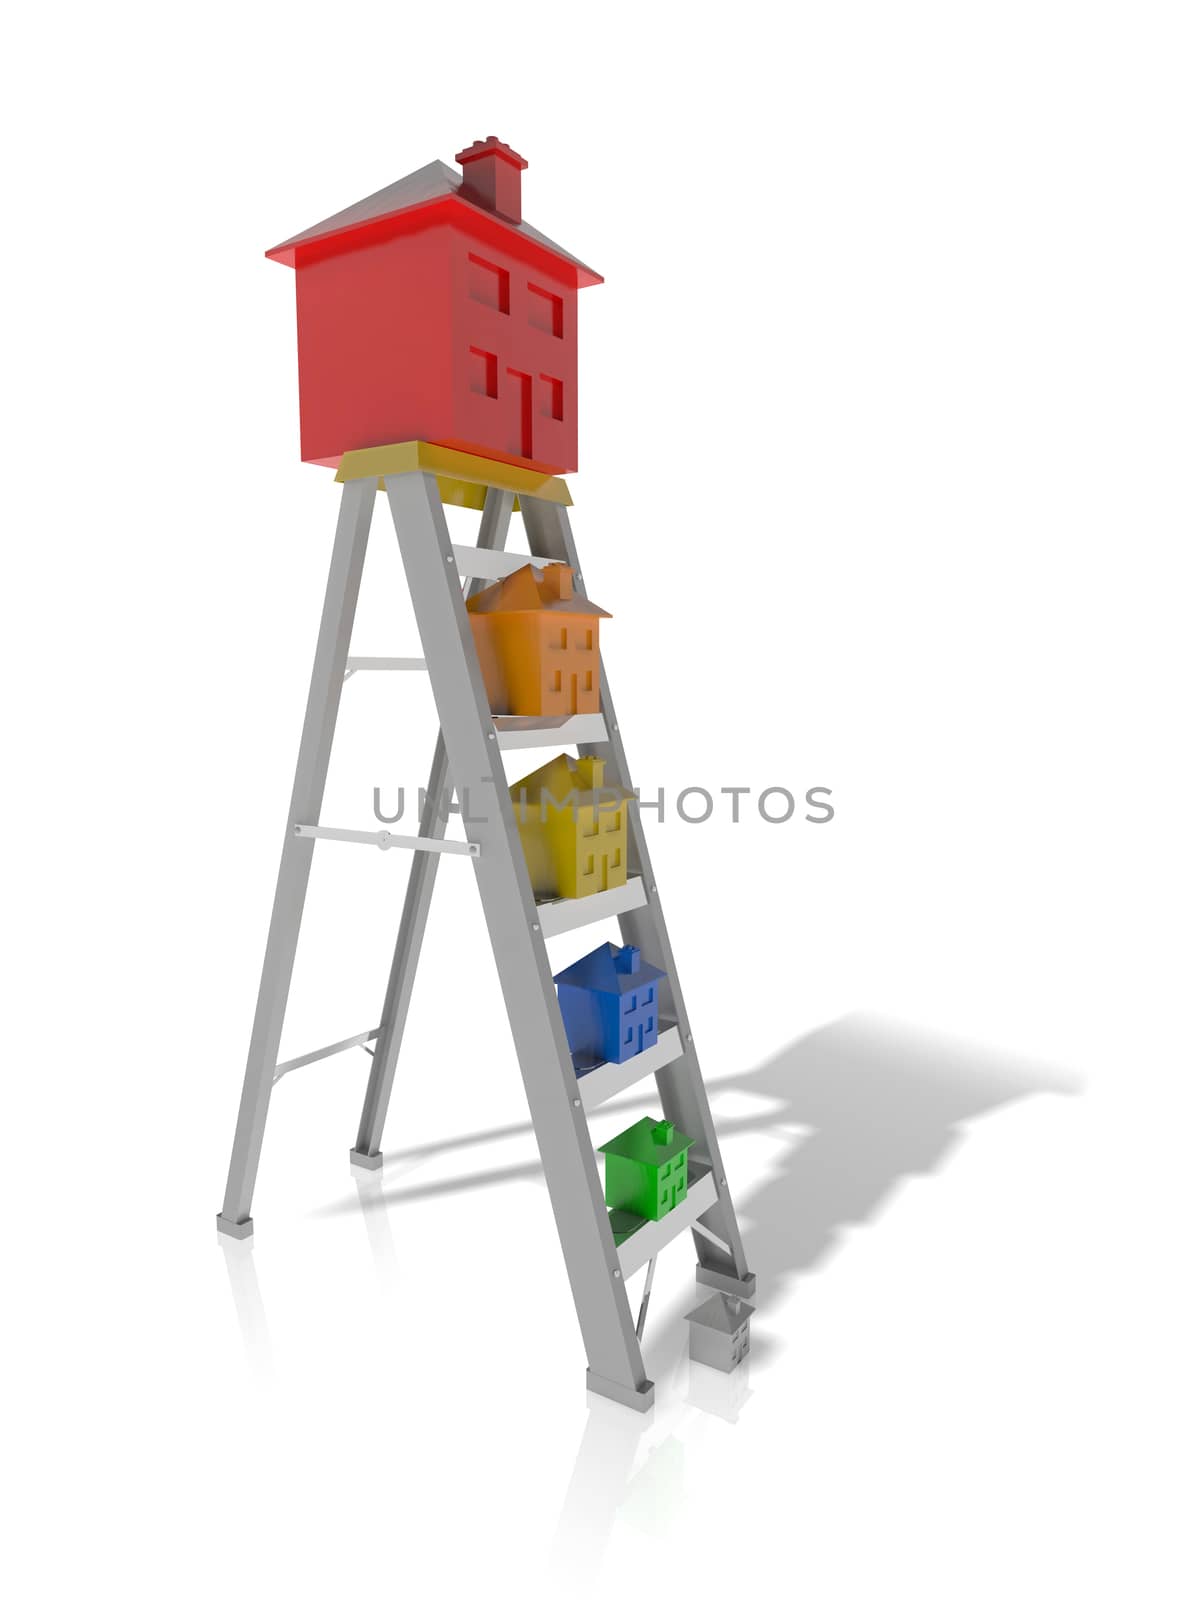 Concept of moving up the property ladder